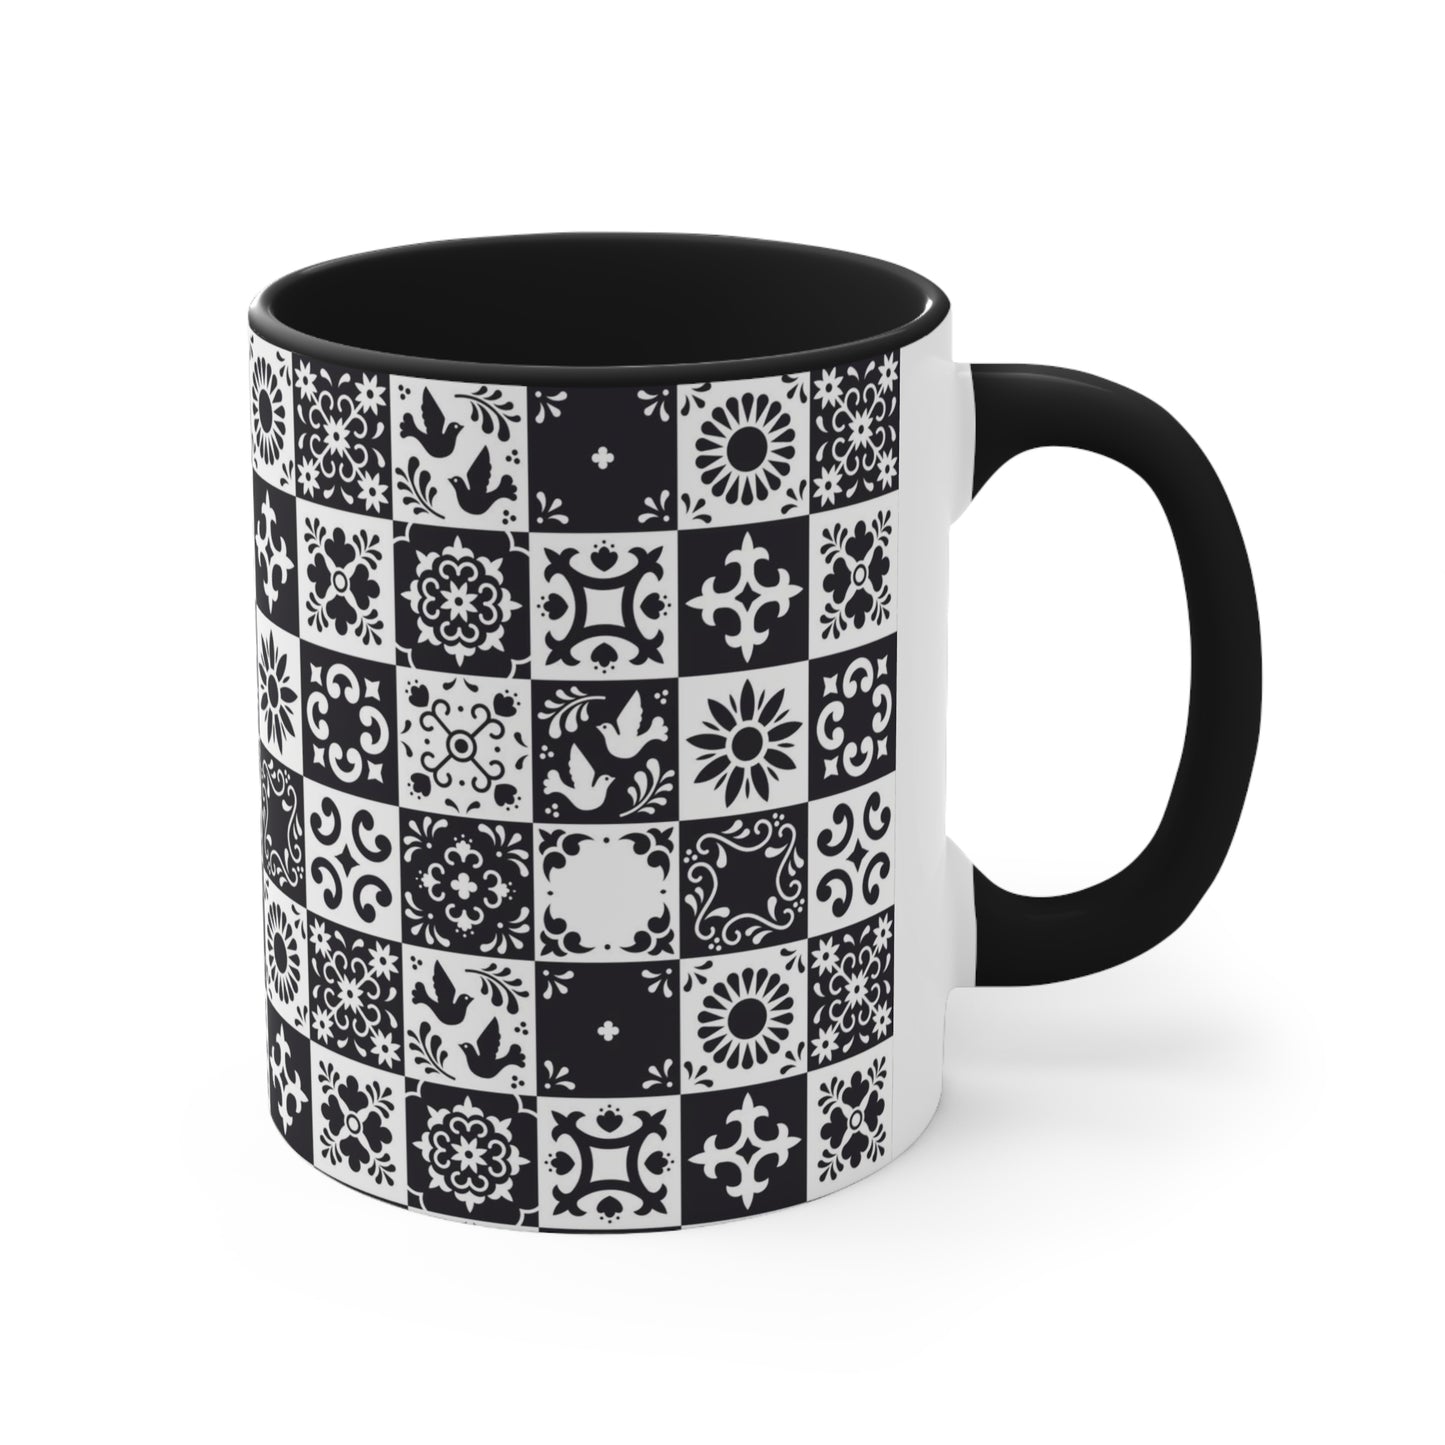 Back and white Talavera Coffee Mug, 11oz for mom or dad. Modern Mexican home decor or kitchen decor. Mexican art mug for Mexican friend or family.